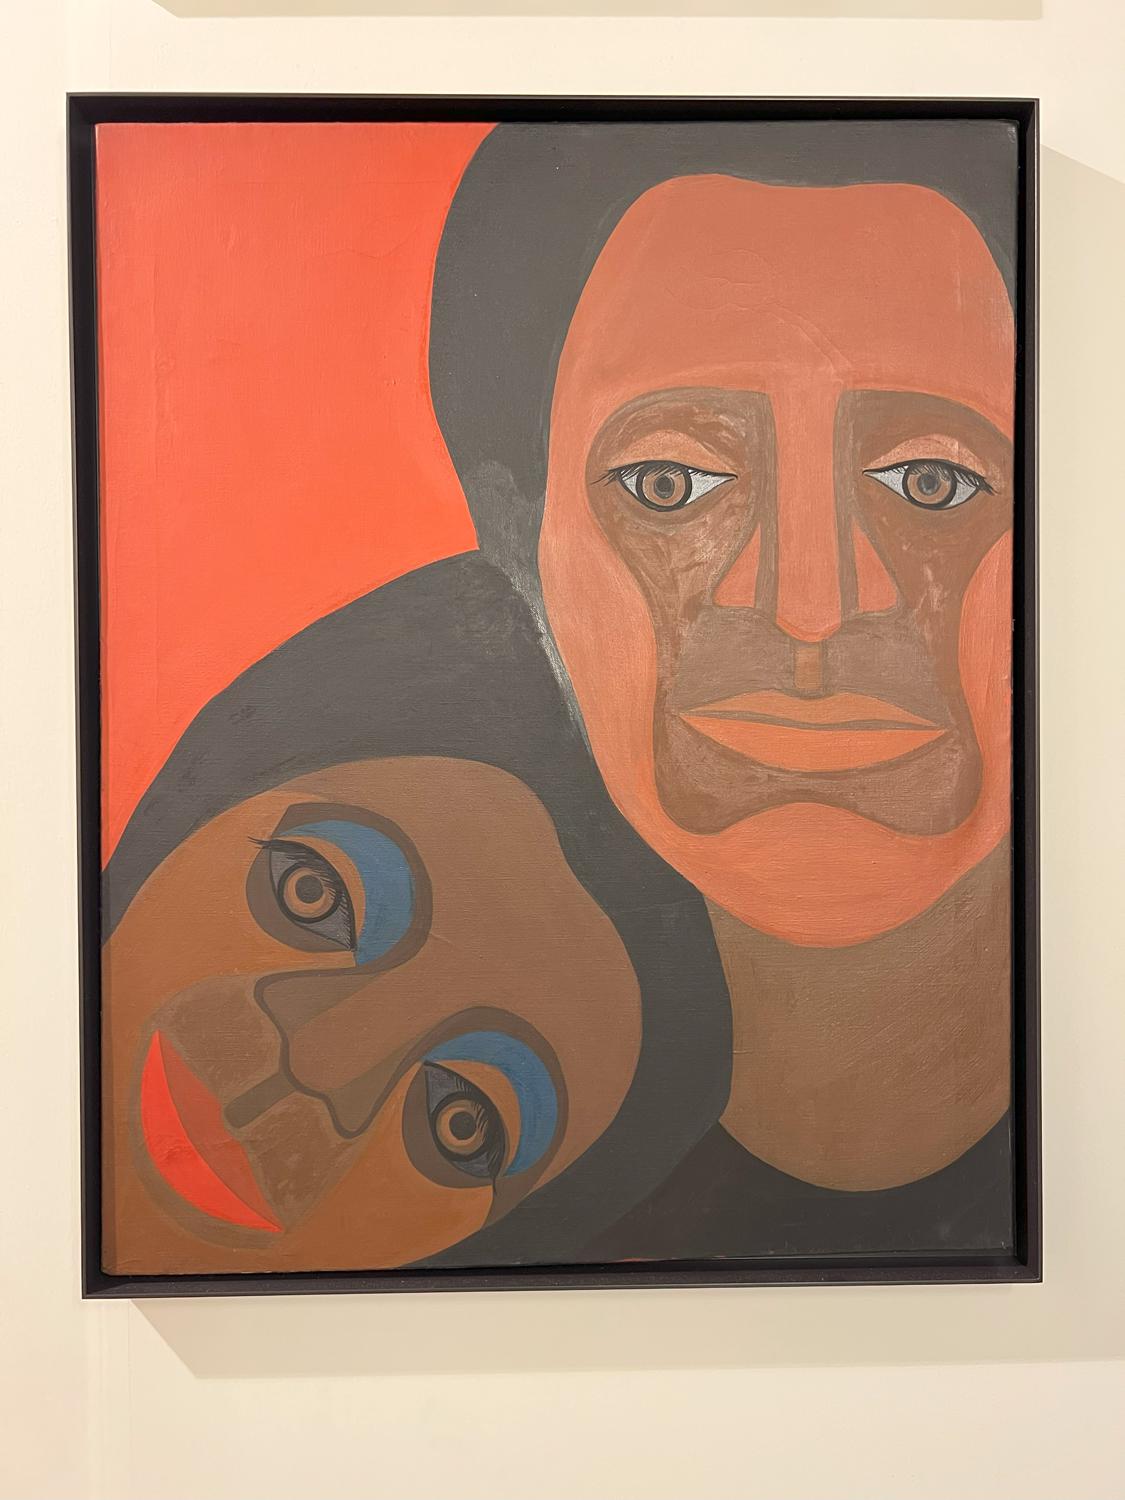 Faith Ringgold. Black Light Series #4: Mommy and Daddy. 1969. $4 млн. Goodman Gallery